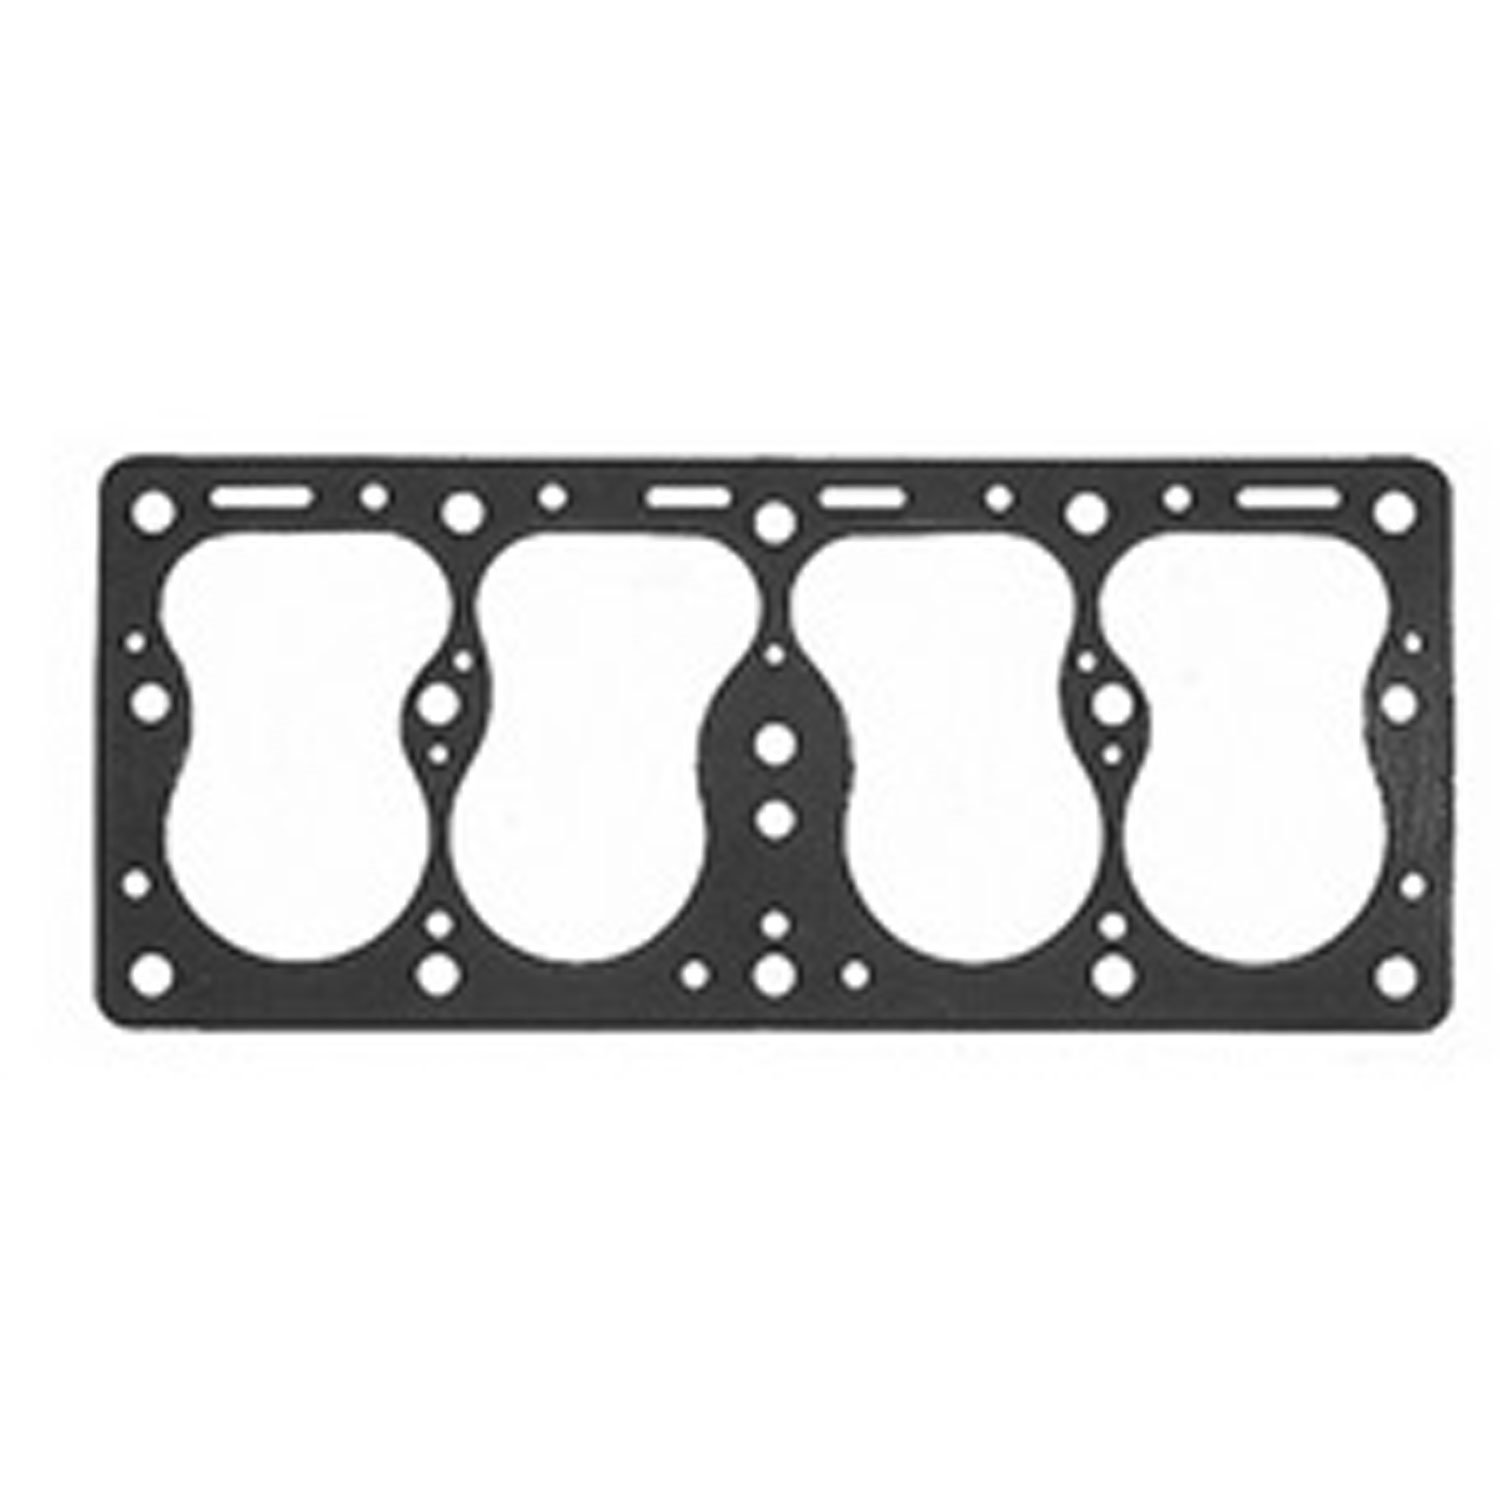 Replacement cylinder head gasket from Omix-ADA, Fits 134 cubic inch L-head engine found in 41-53 Willys models